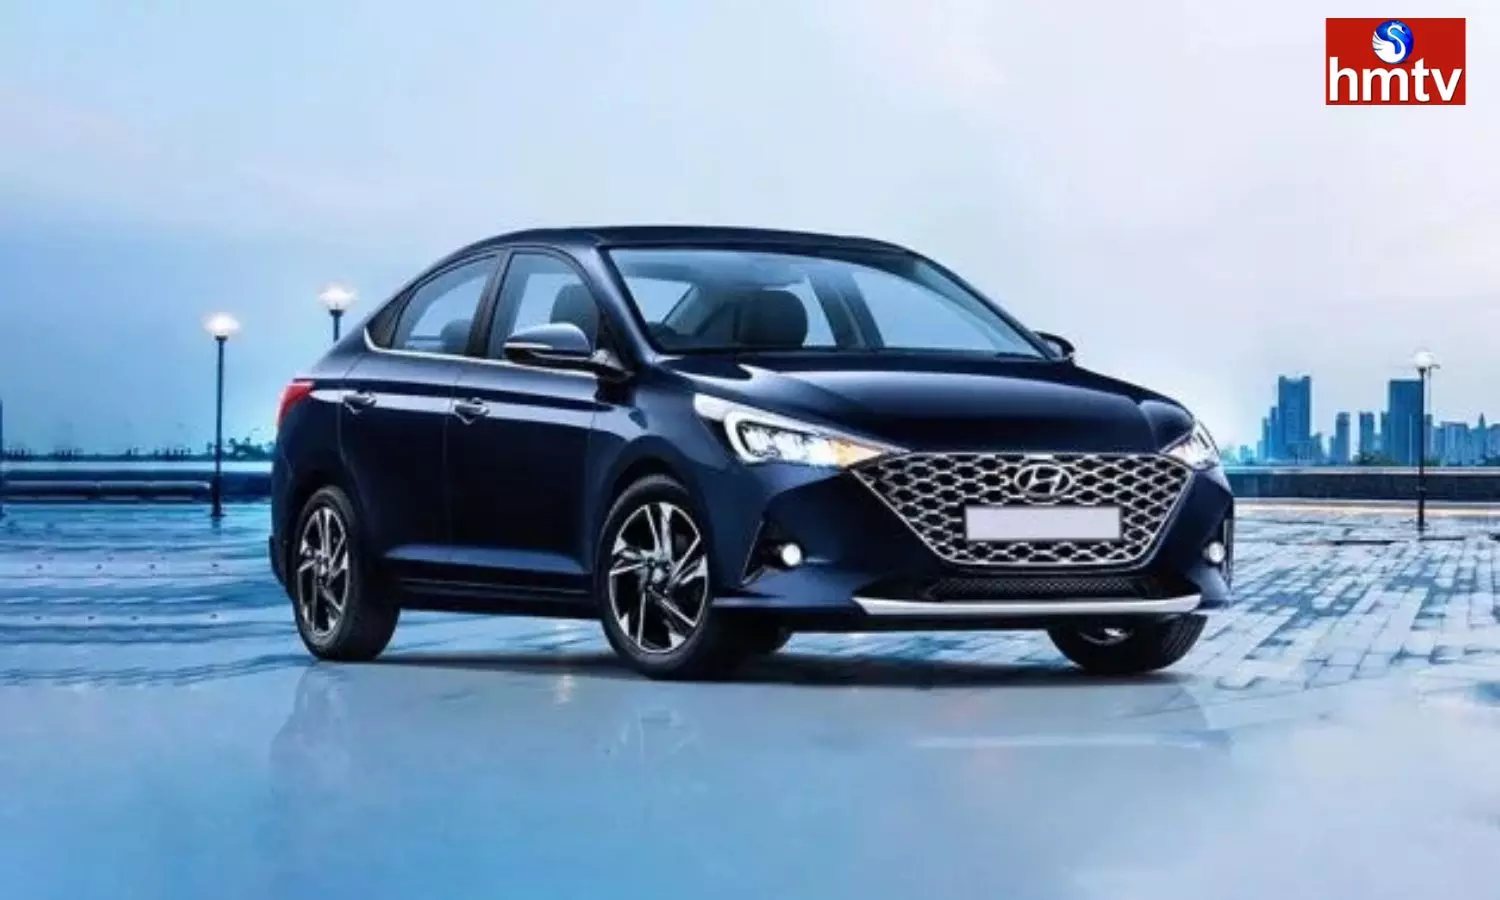 Hyundai recalls CVT version of Verna in India check price and features